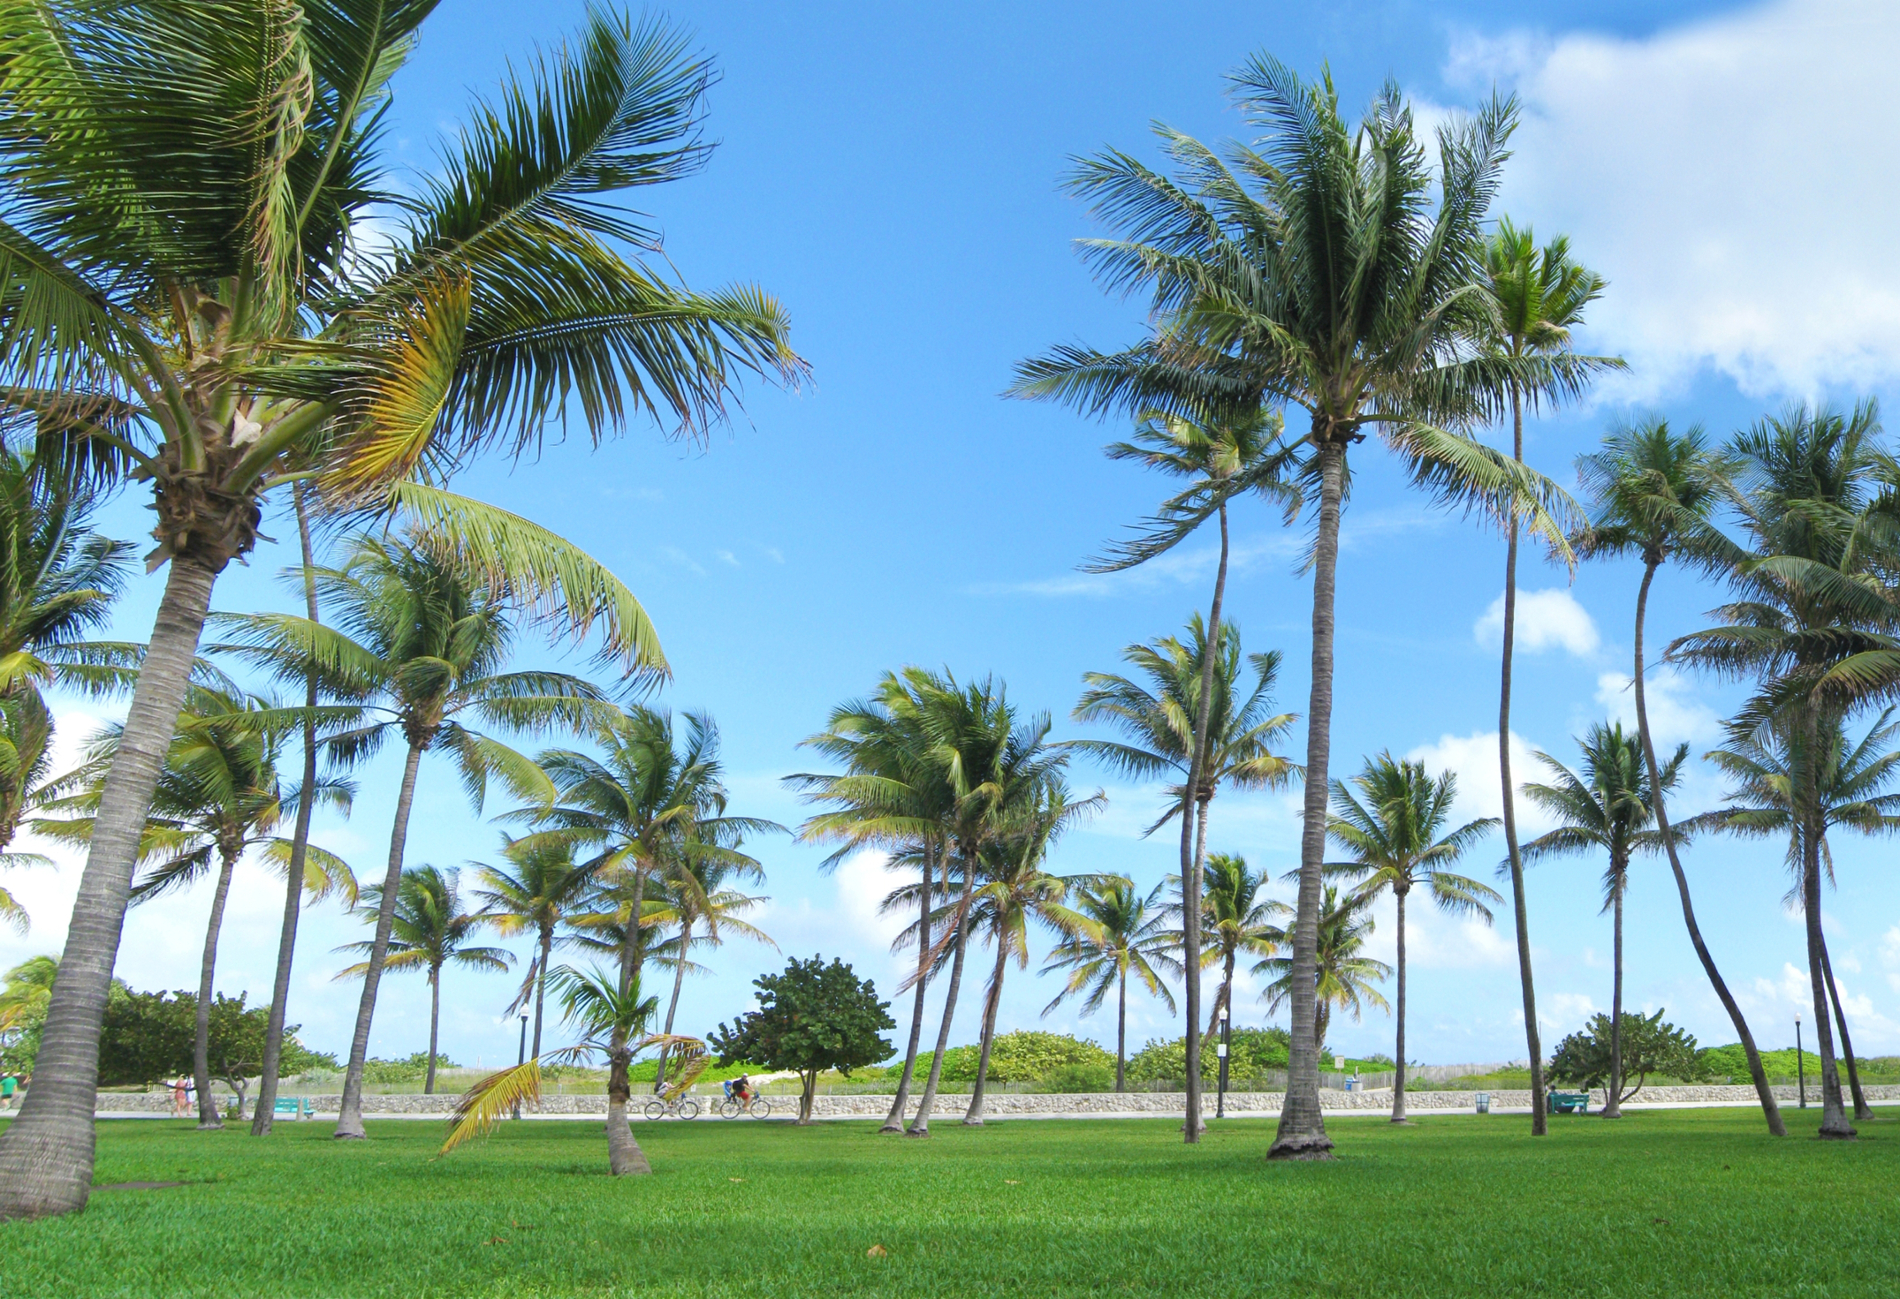 A lawn of palm trees with people bicycling in the background